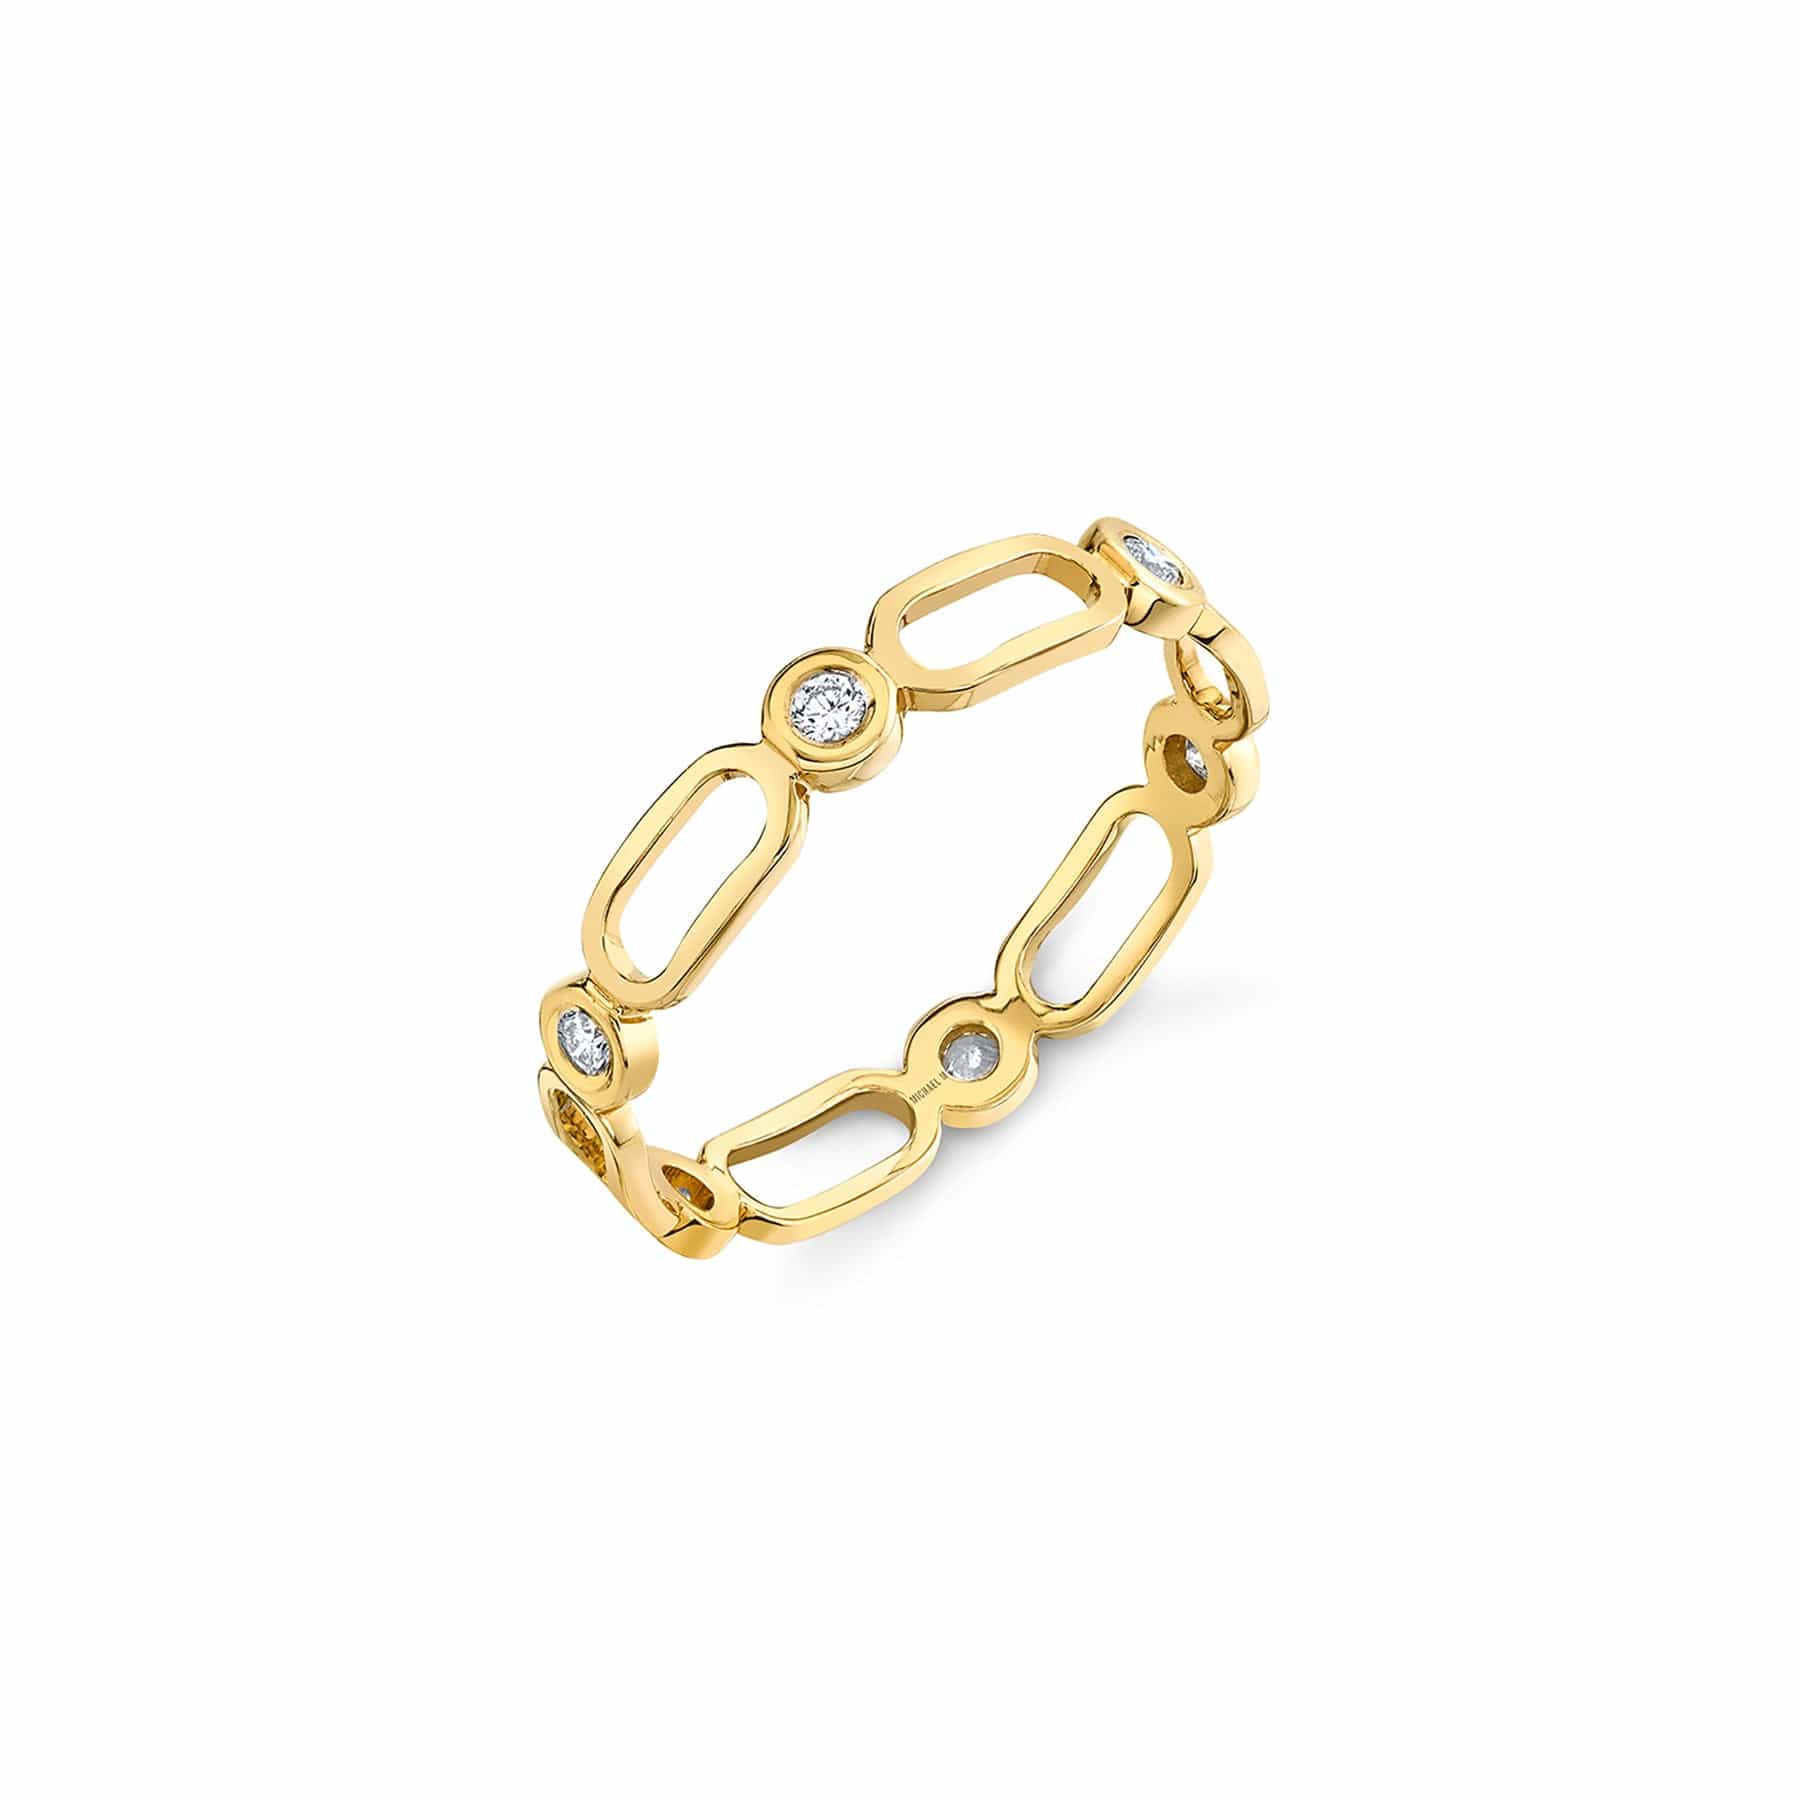 MICHAEL M Fashion Rings 14K Yellow Gold / 4 Connection Ring F358